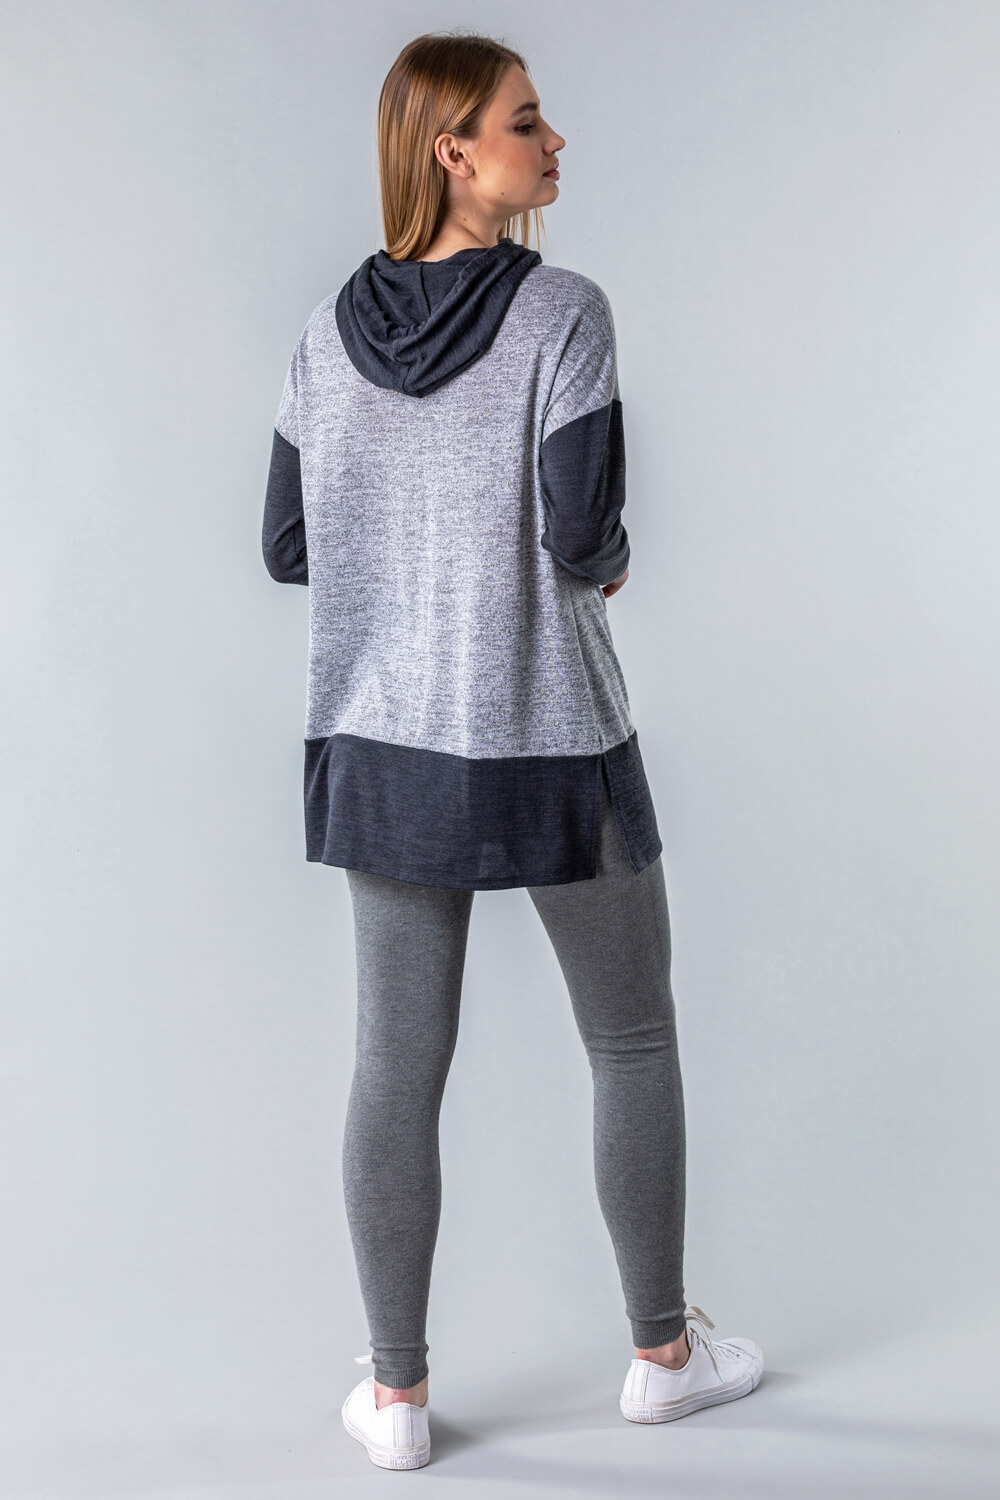 Grey Two Tone Lounge Hooded Top, Image 3 of 4